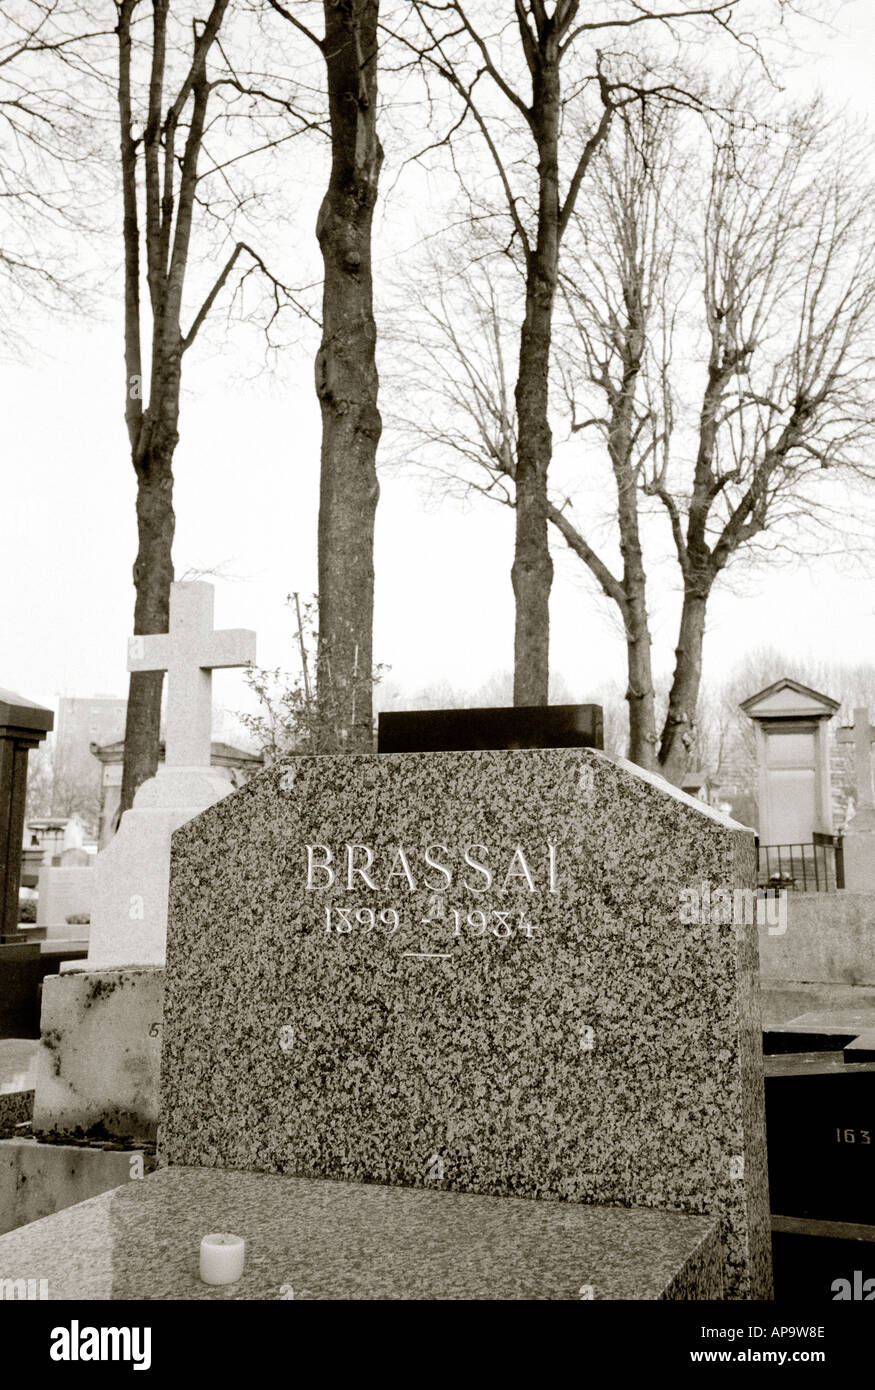 The grave of photographer Brassai in Montparnasse Cemetery in the city of Paris In France In Europe Stock Photo